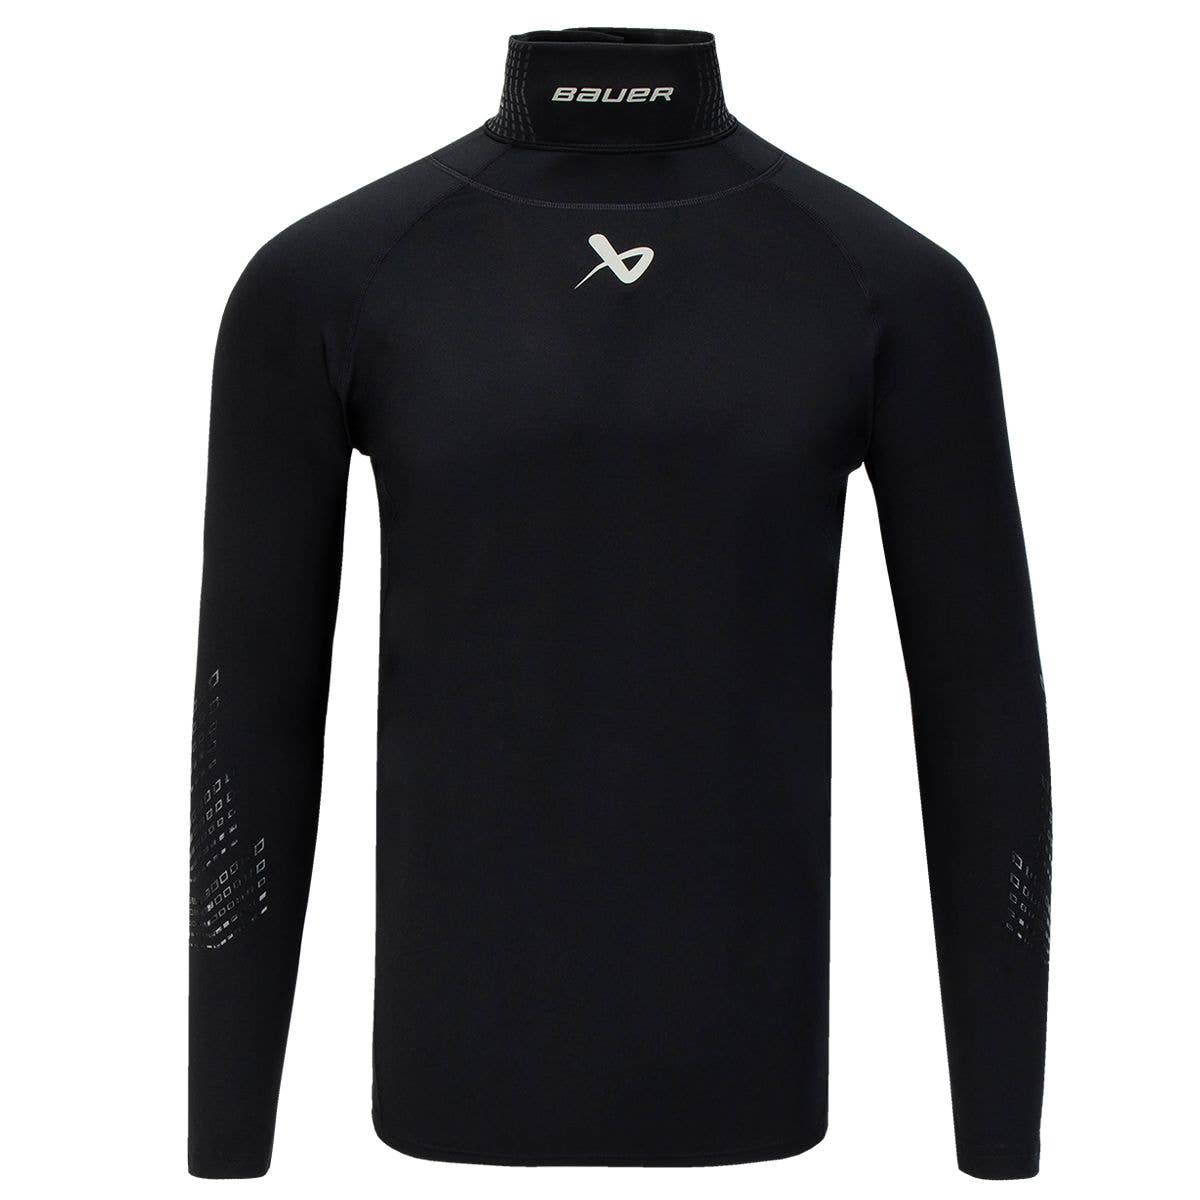 Bauer Neckprotect Long Sleeve Shirt - Youth